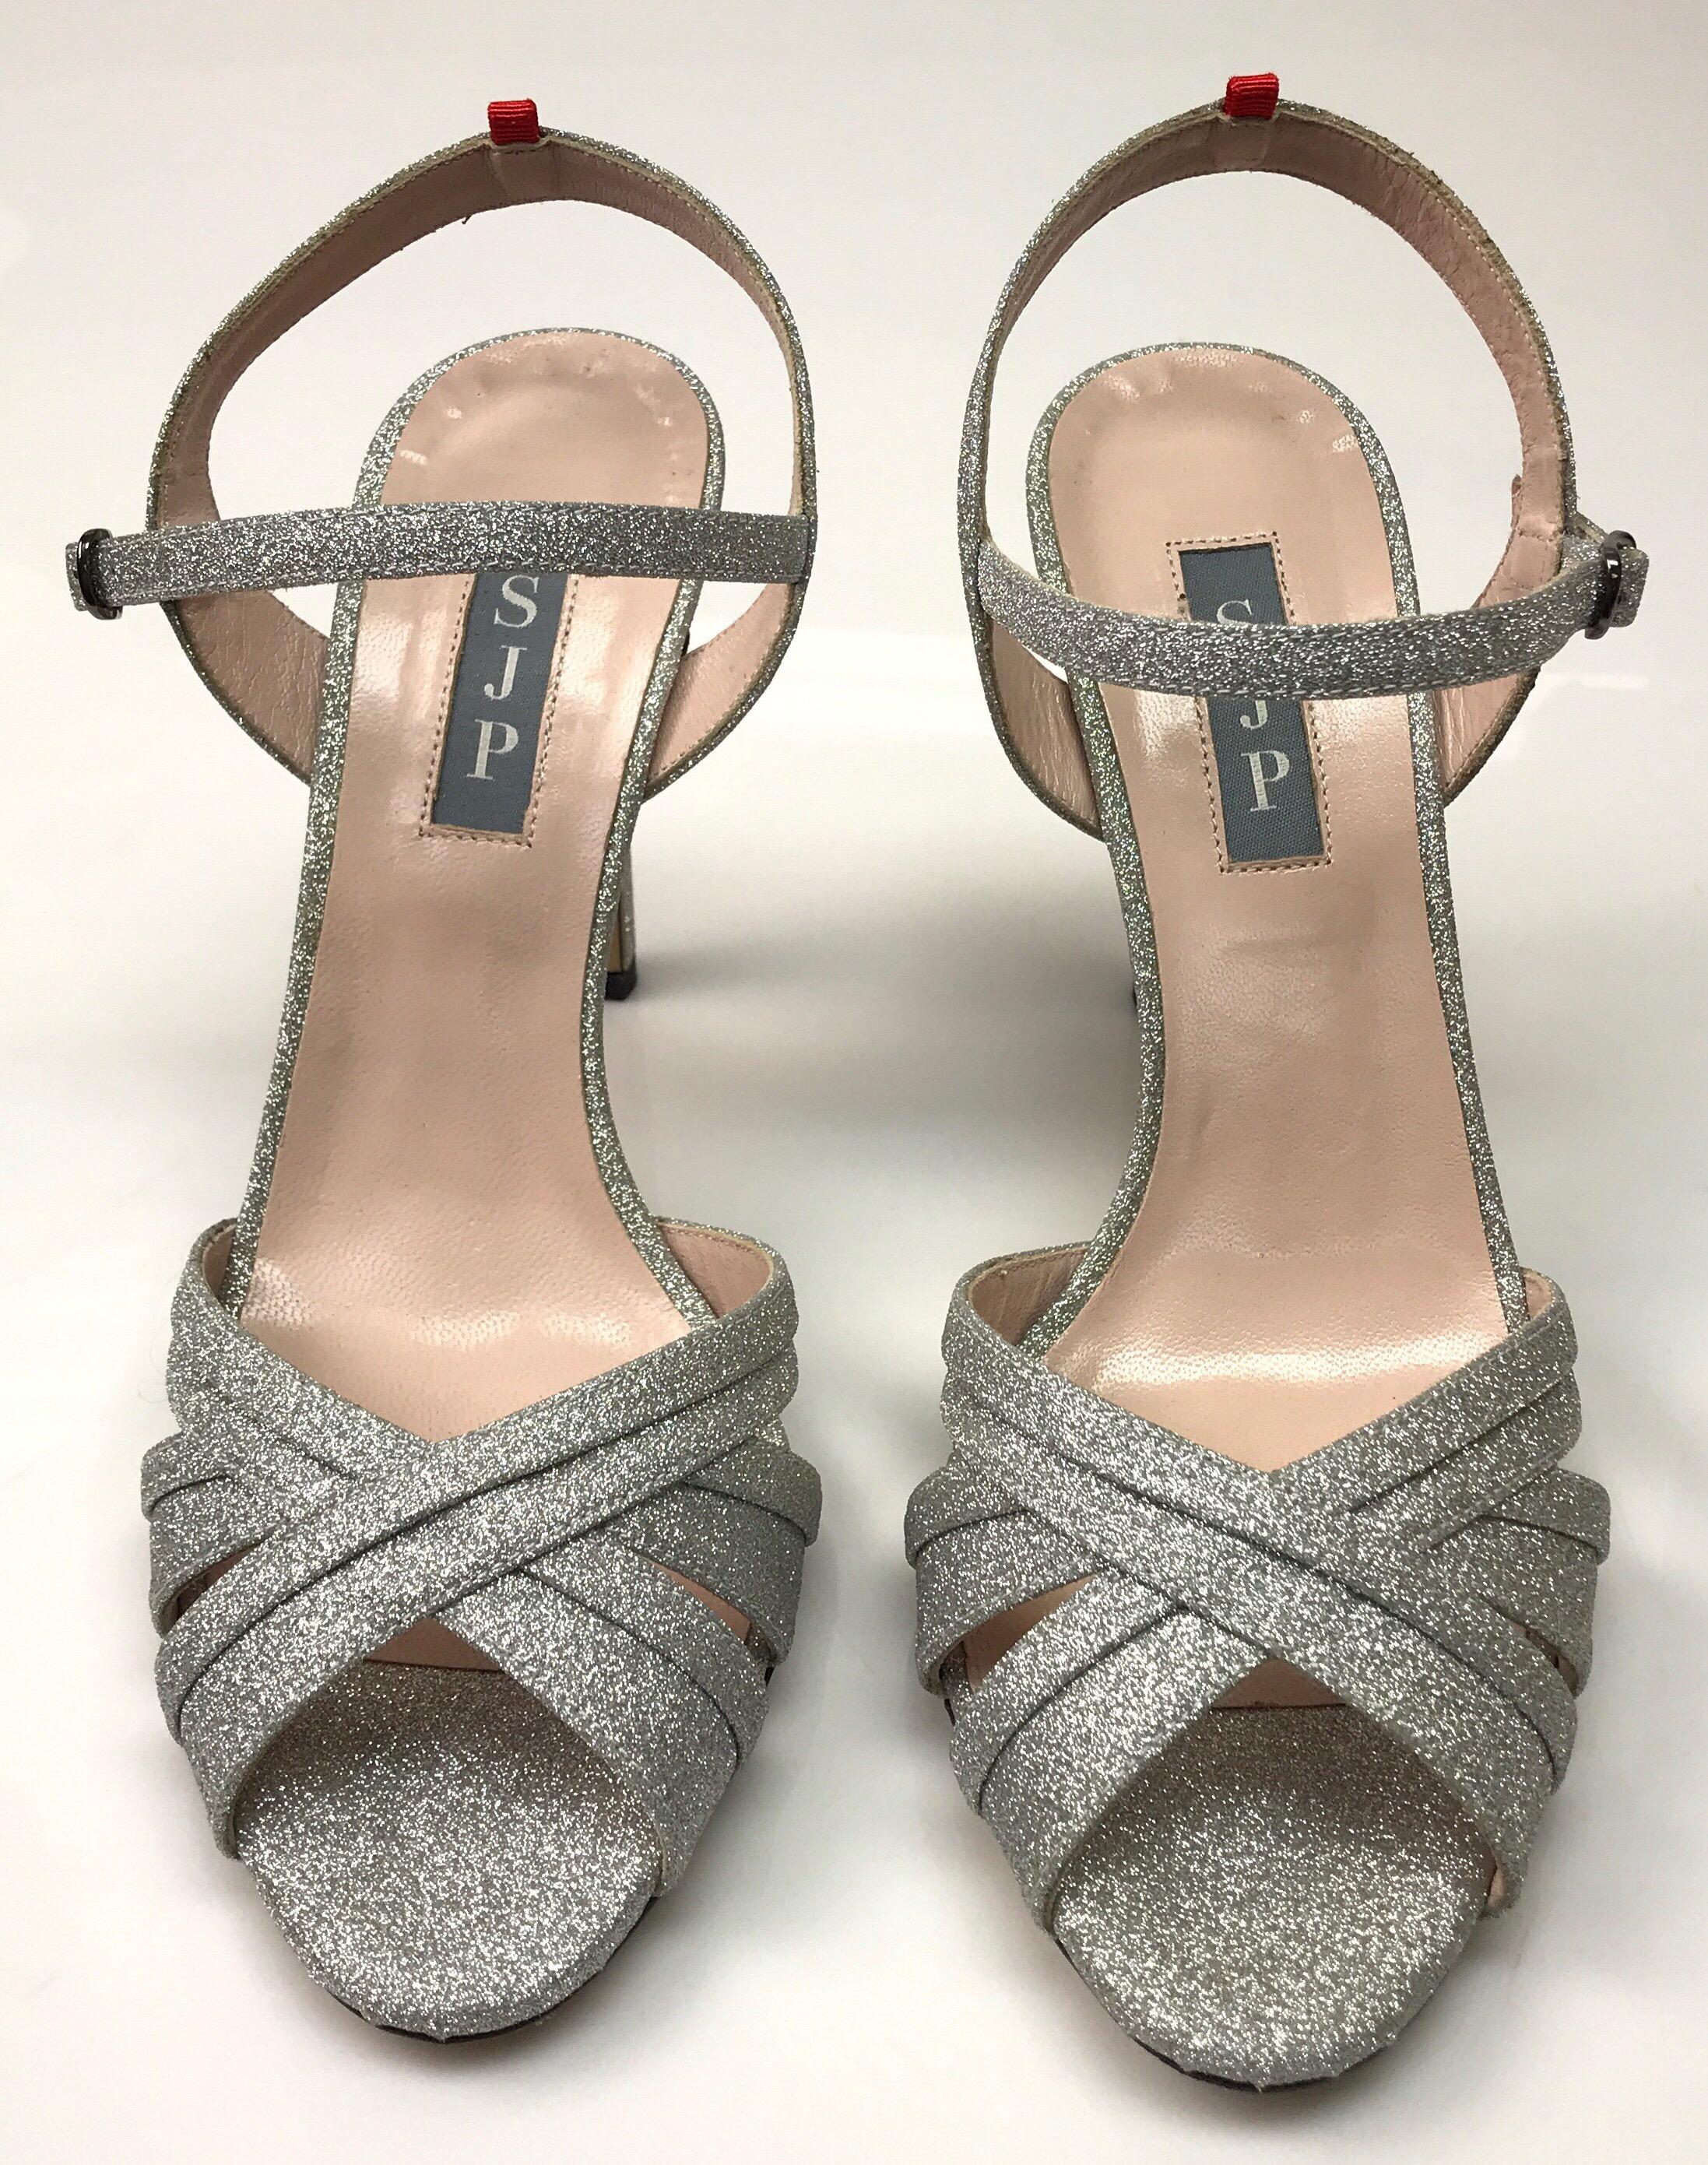 SJP Silver Glitter Ankle Strap Sandal-38.5. These amazing Sarah Jessica Parker heels are in excellent condition. They show barely any use, with small smudges on the bottoms, shown in picture. They are a silver, sparkly color and have a strappy toe